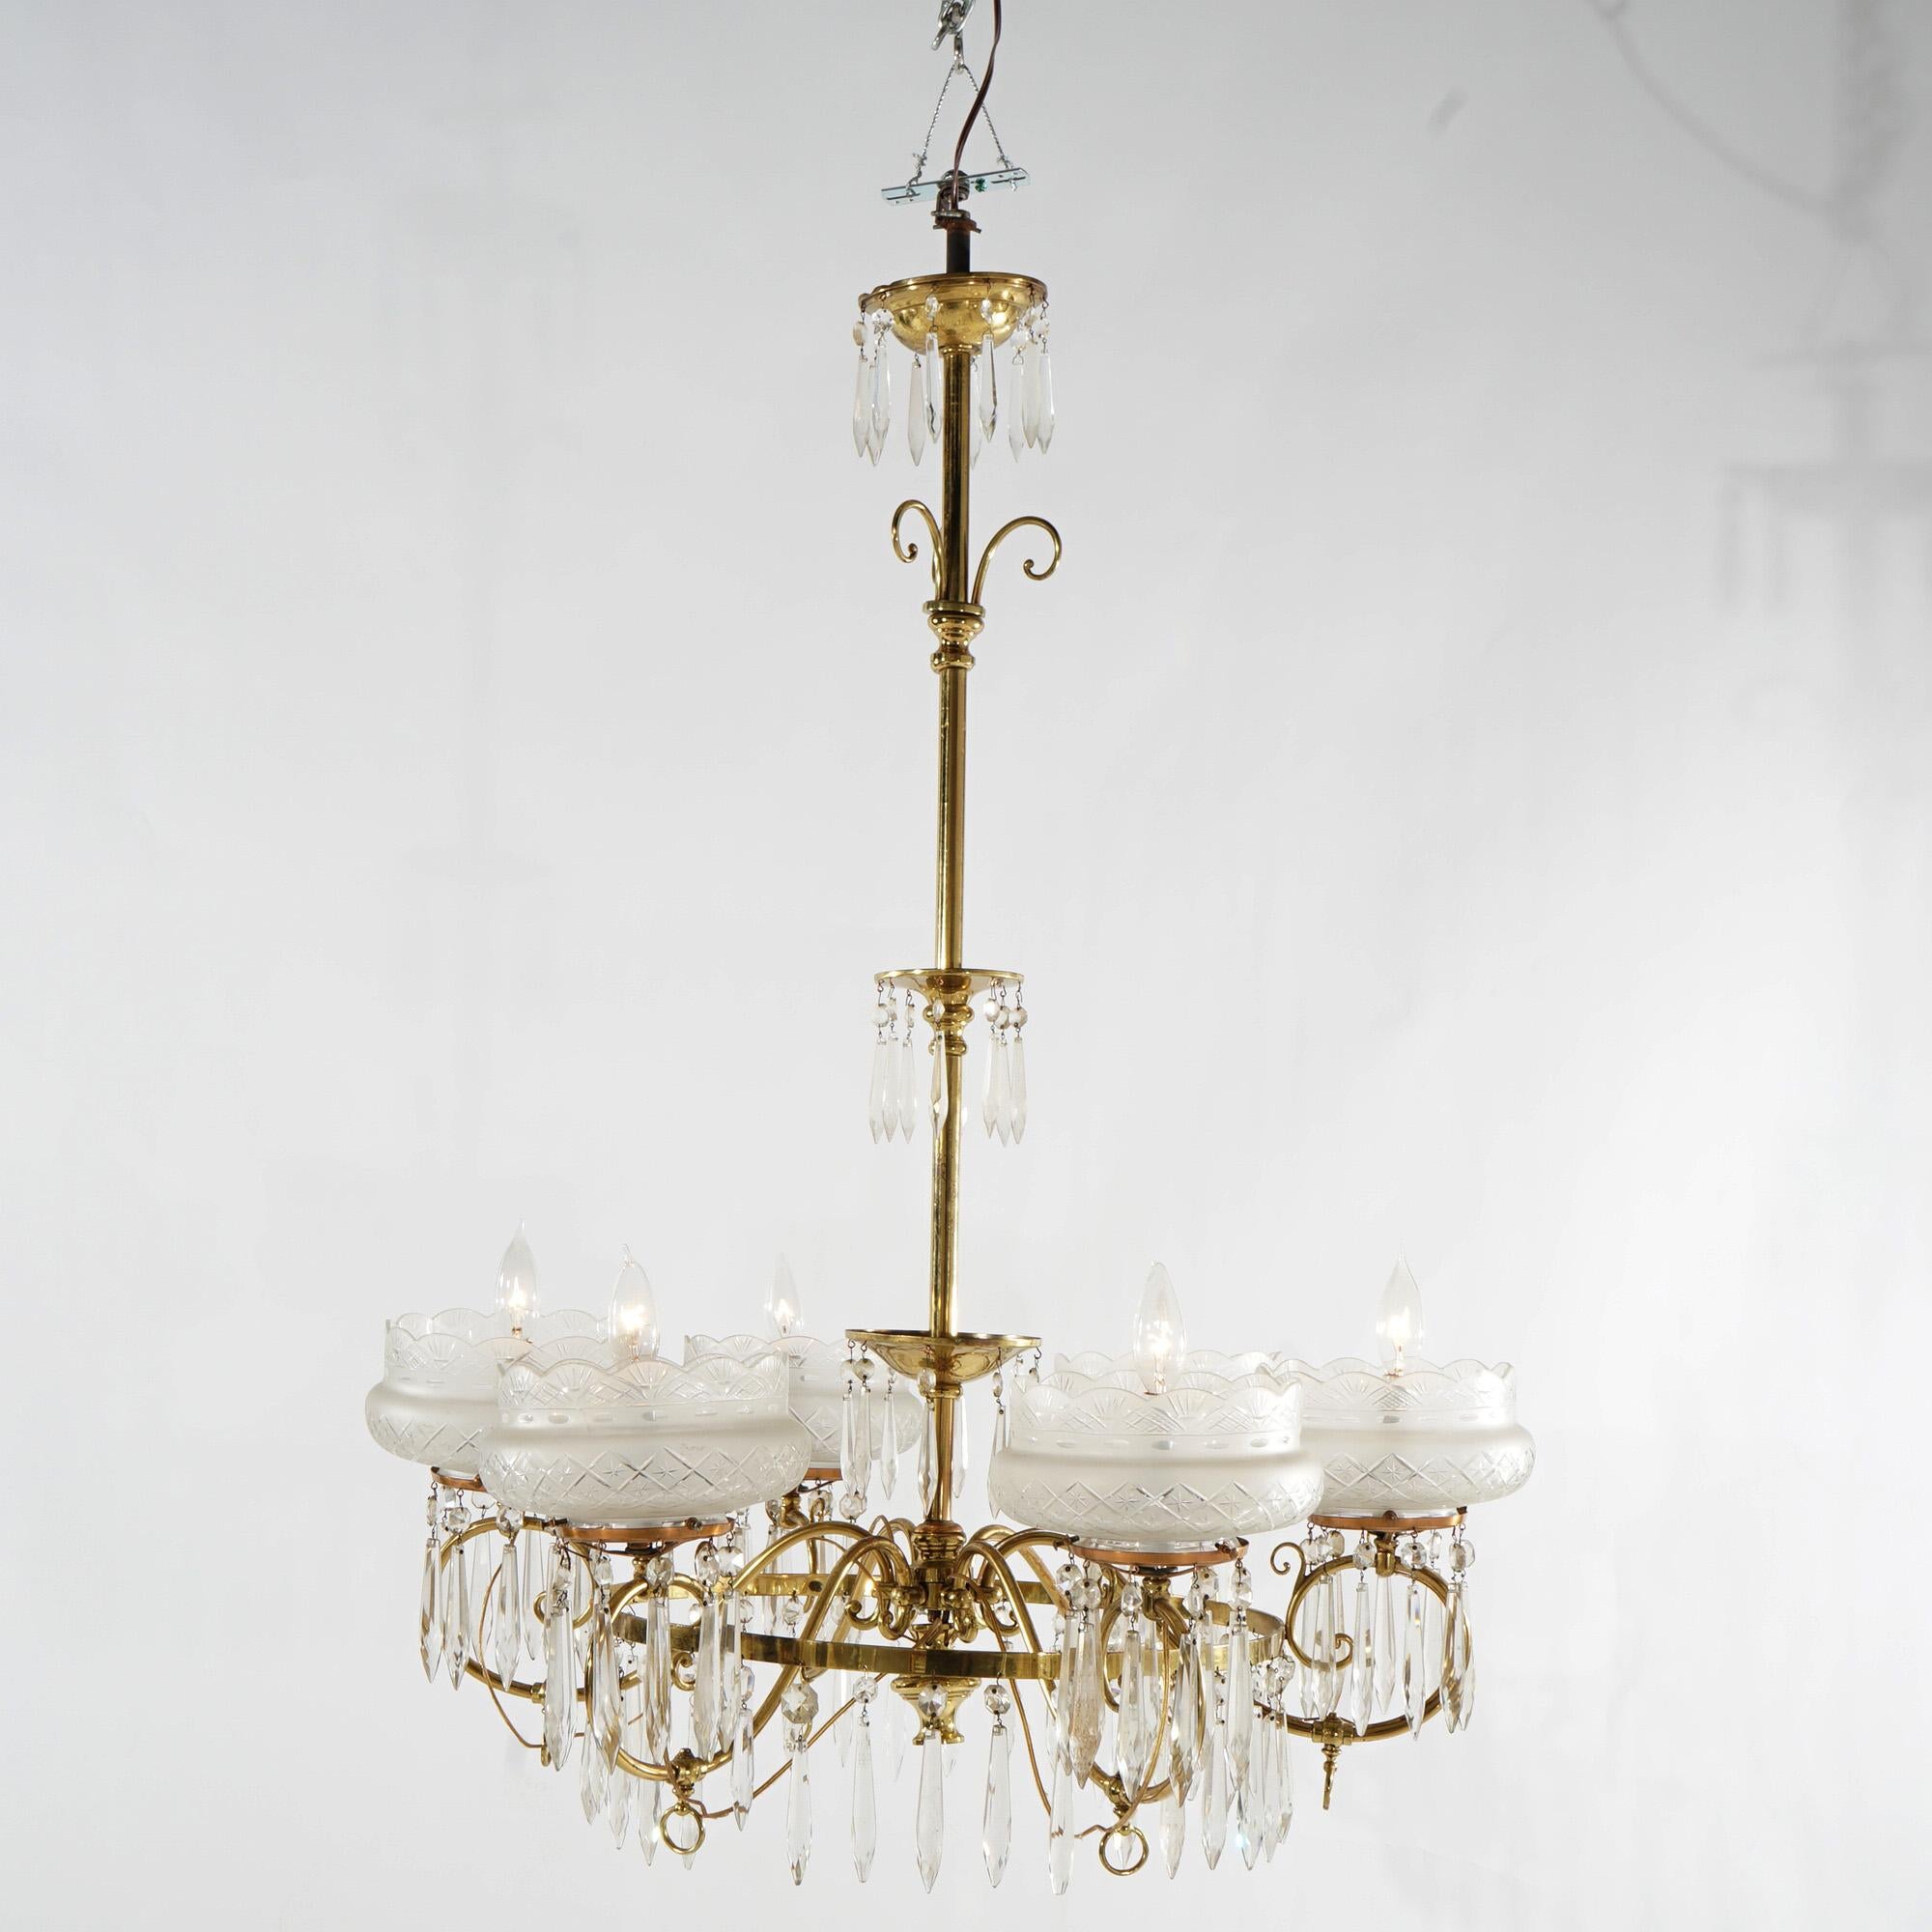 Large Antique Aesthetic Brass Gas Chandelier With Cut Glass Shades & Crystals 1